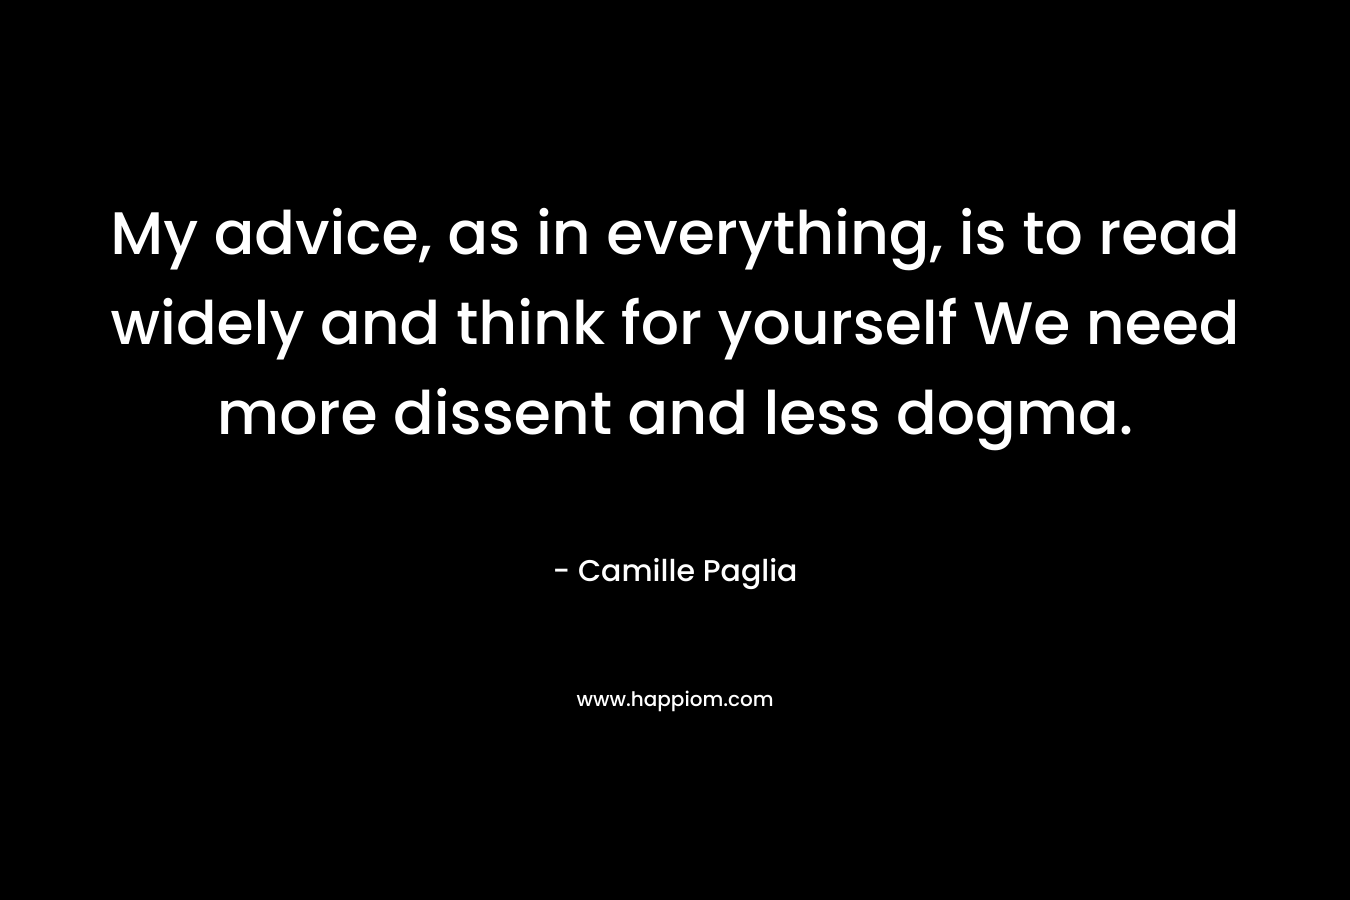 My advice, as in everything, is to read widely and think for yourself We need more dissent and less dogma. – Camille Paglia